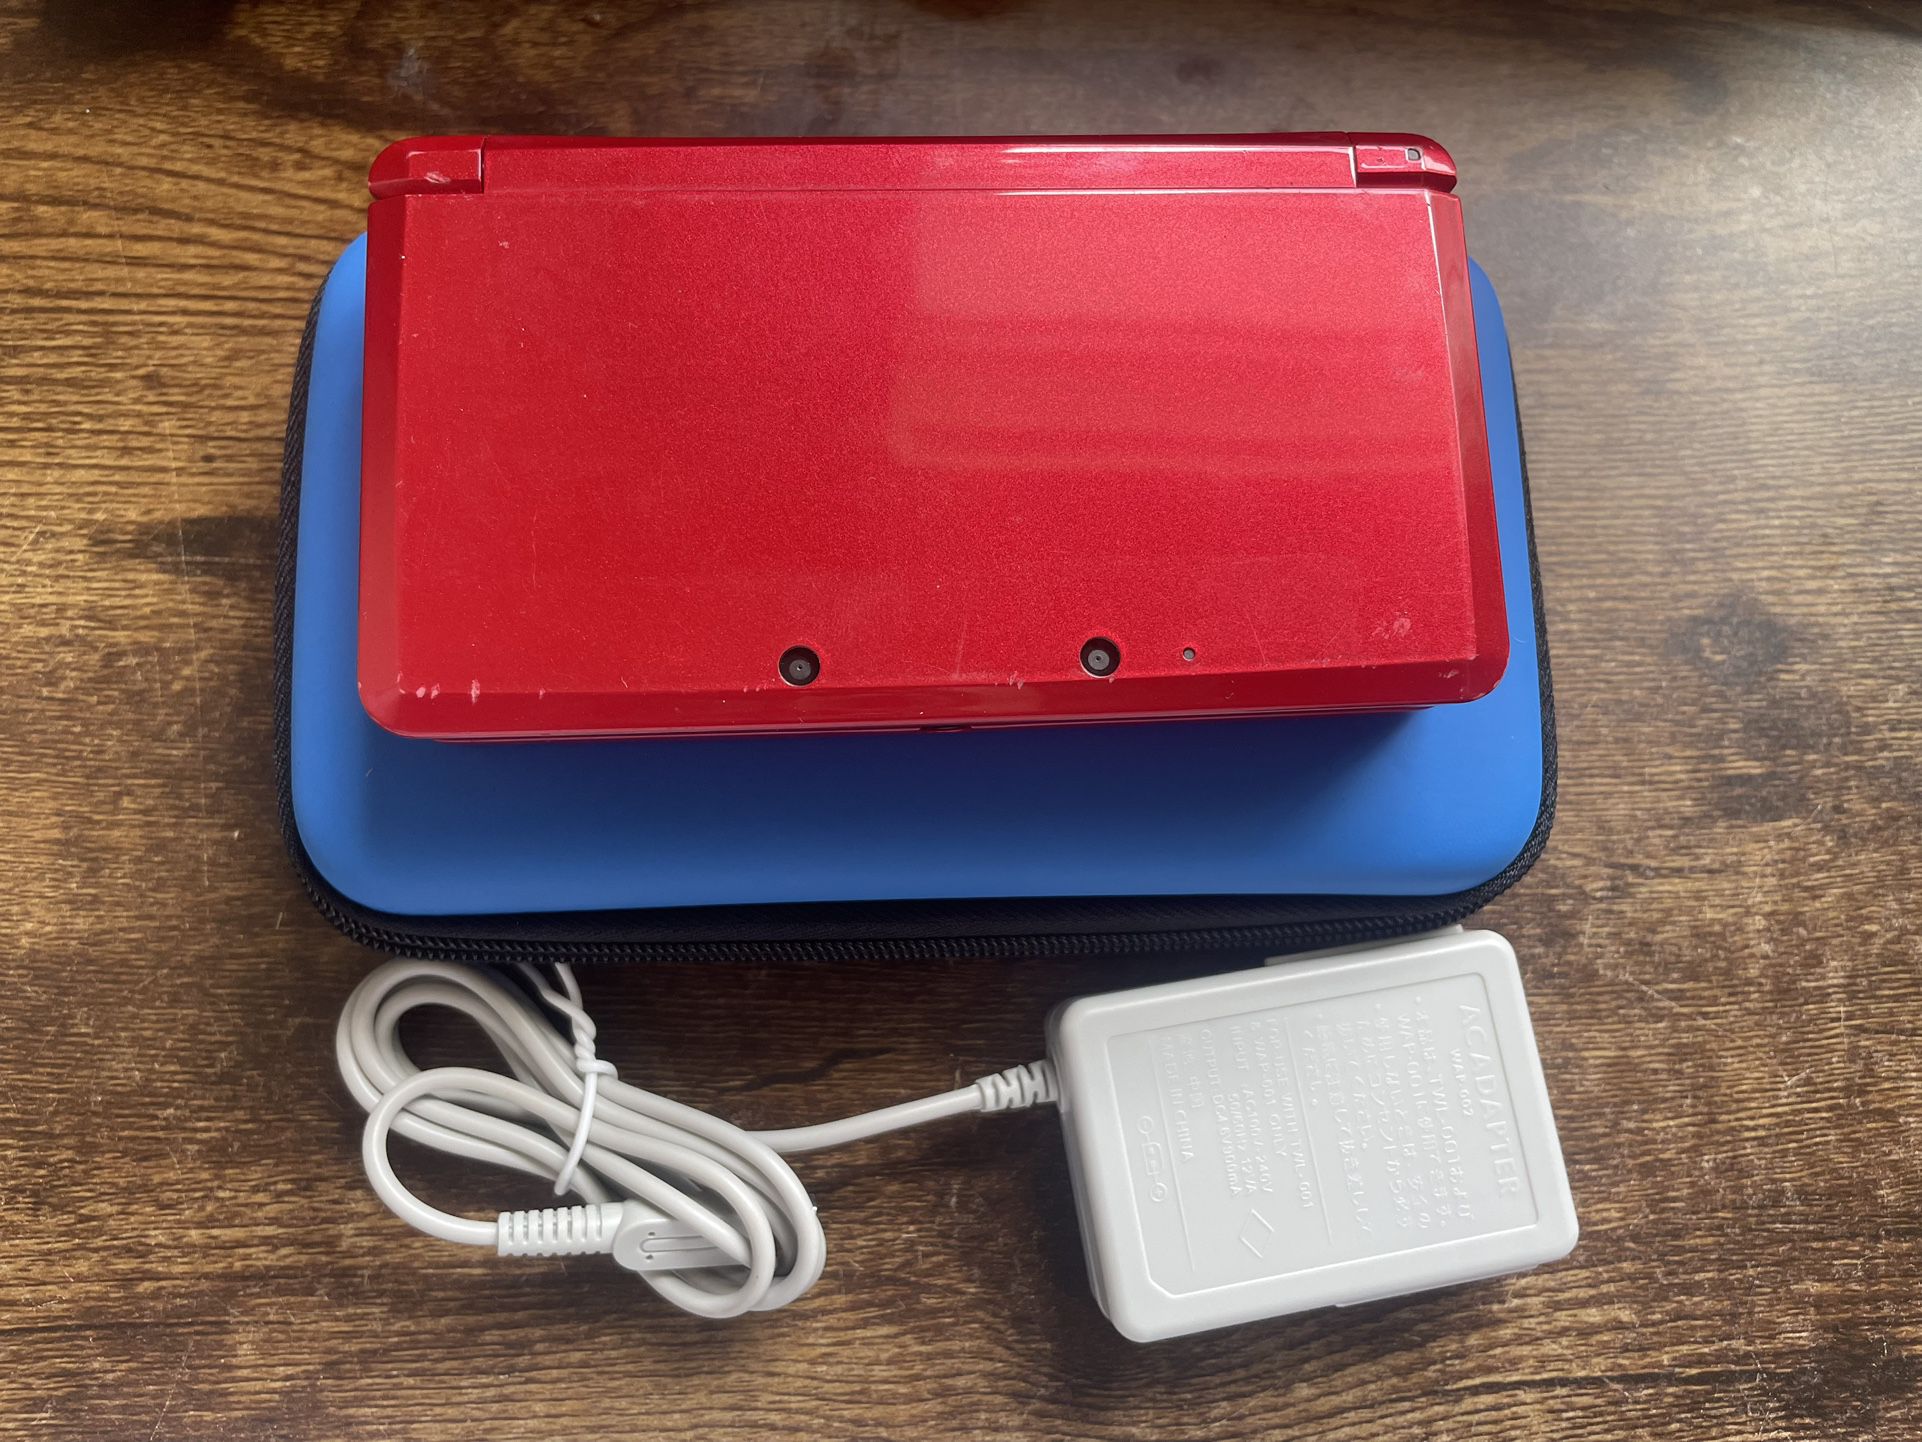 Nintendo 3DS Handheld System - Flame Red